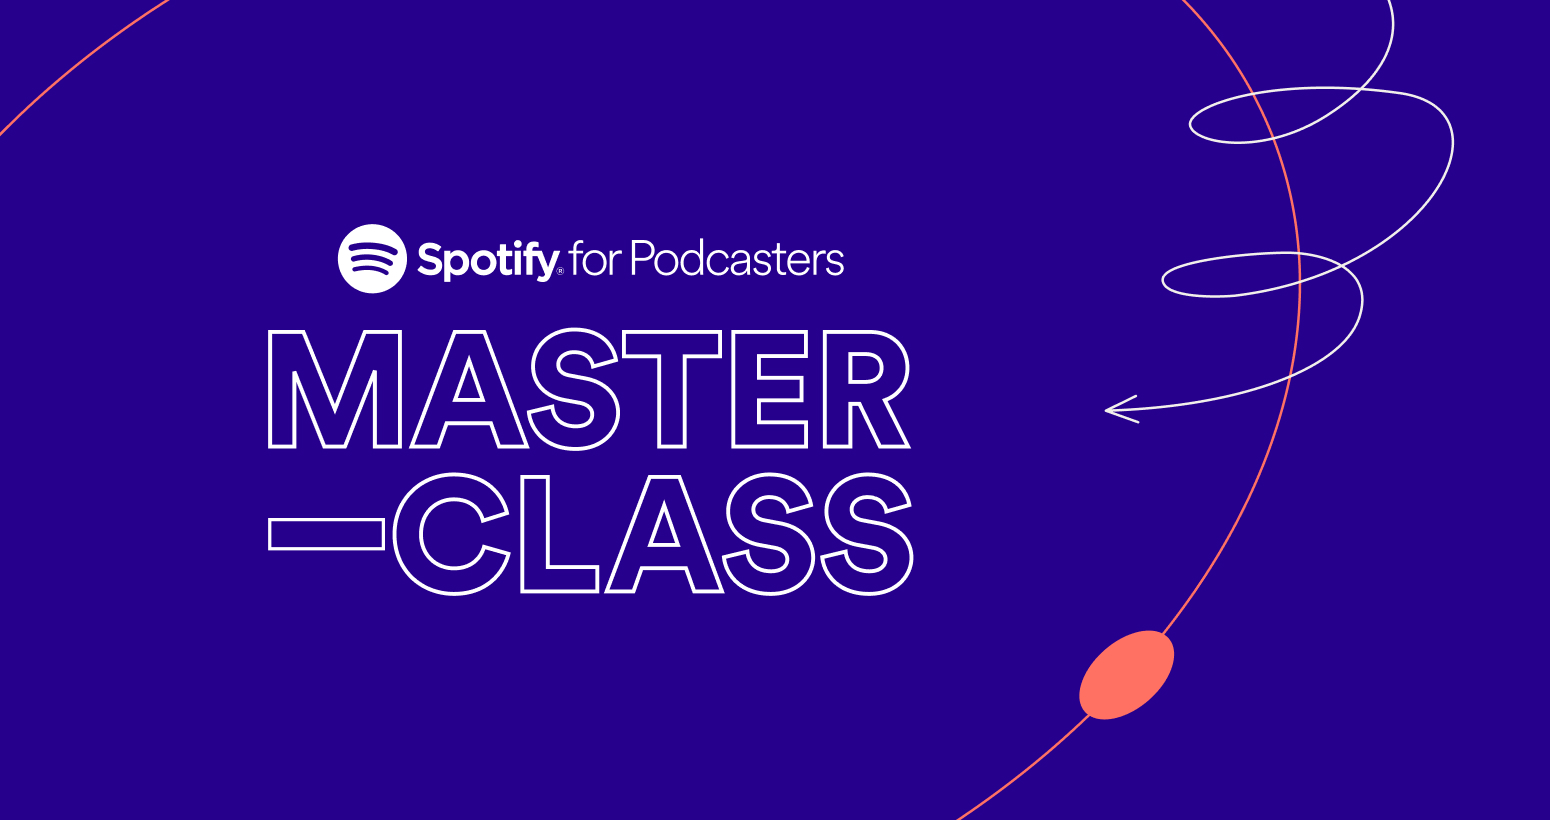 Unlock Your Podcast Potential With Spotify for Podcasters Masterclass —  Spotify